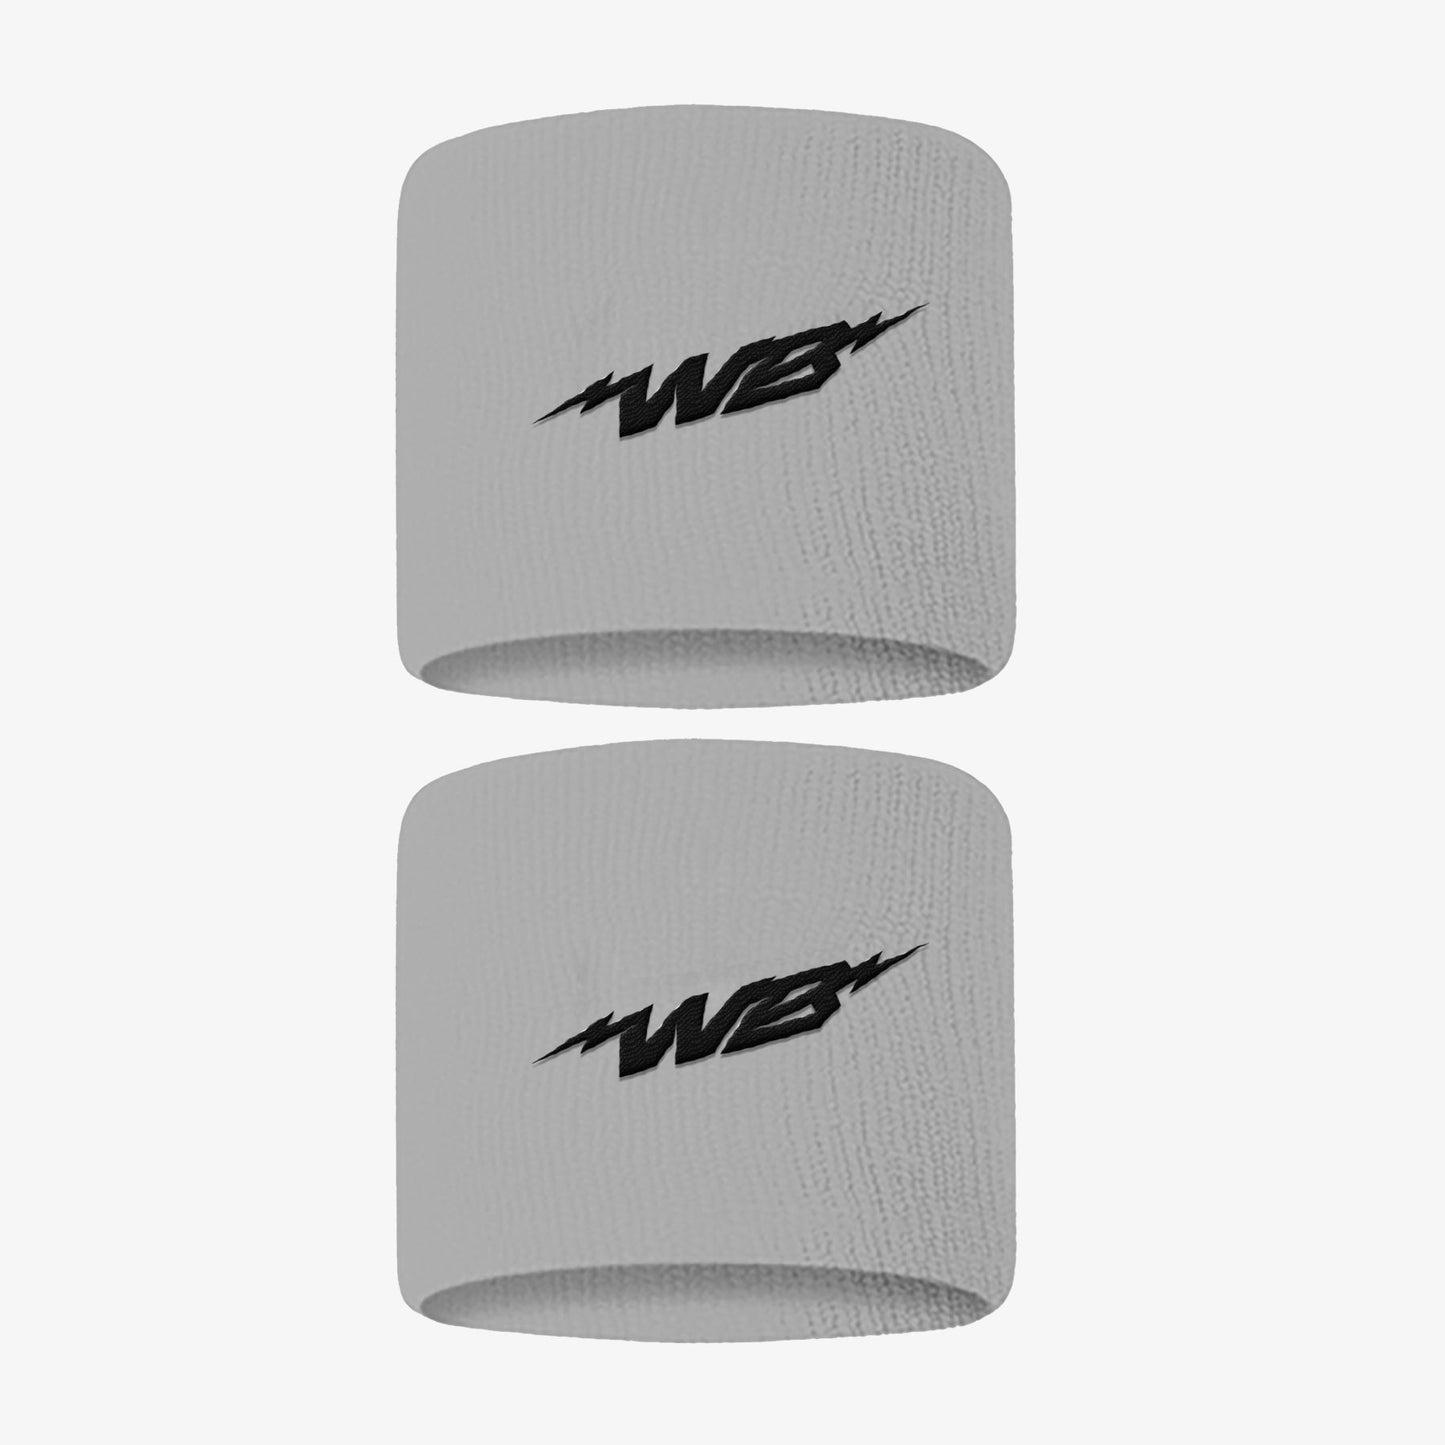 3" WRISTBANDS (GREY, 2-PACK) - We Ball Sports